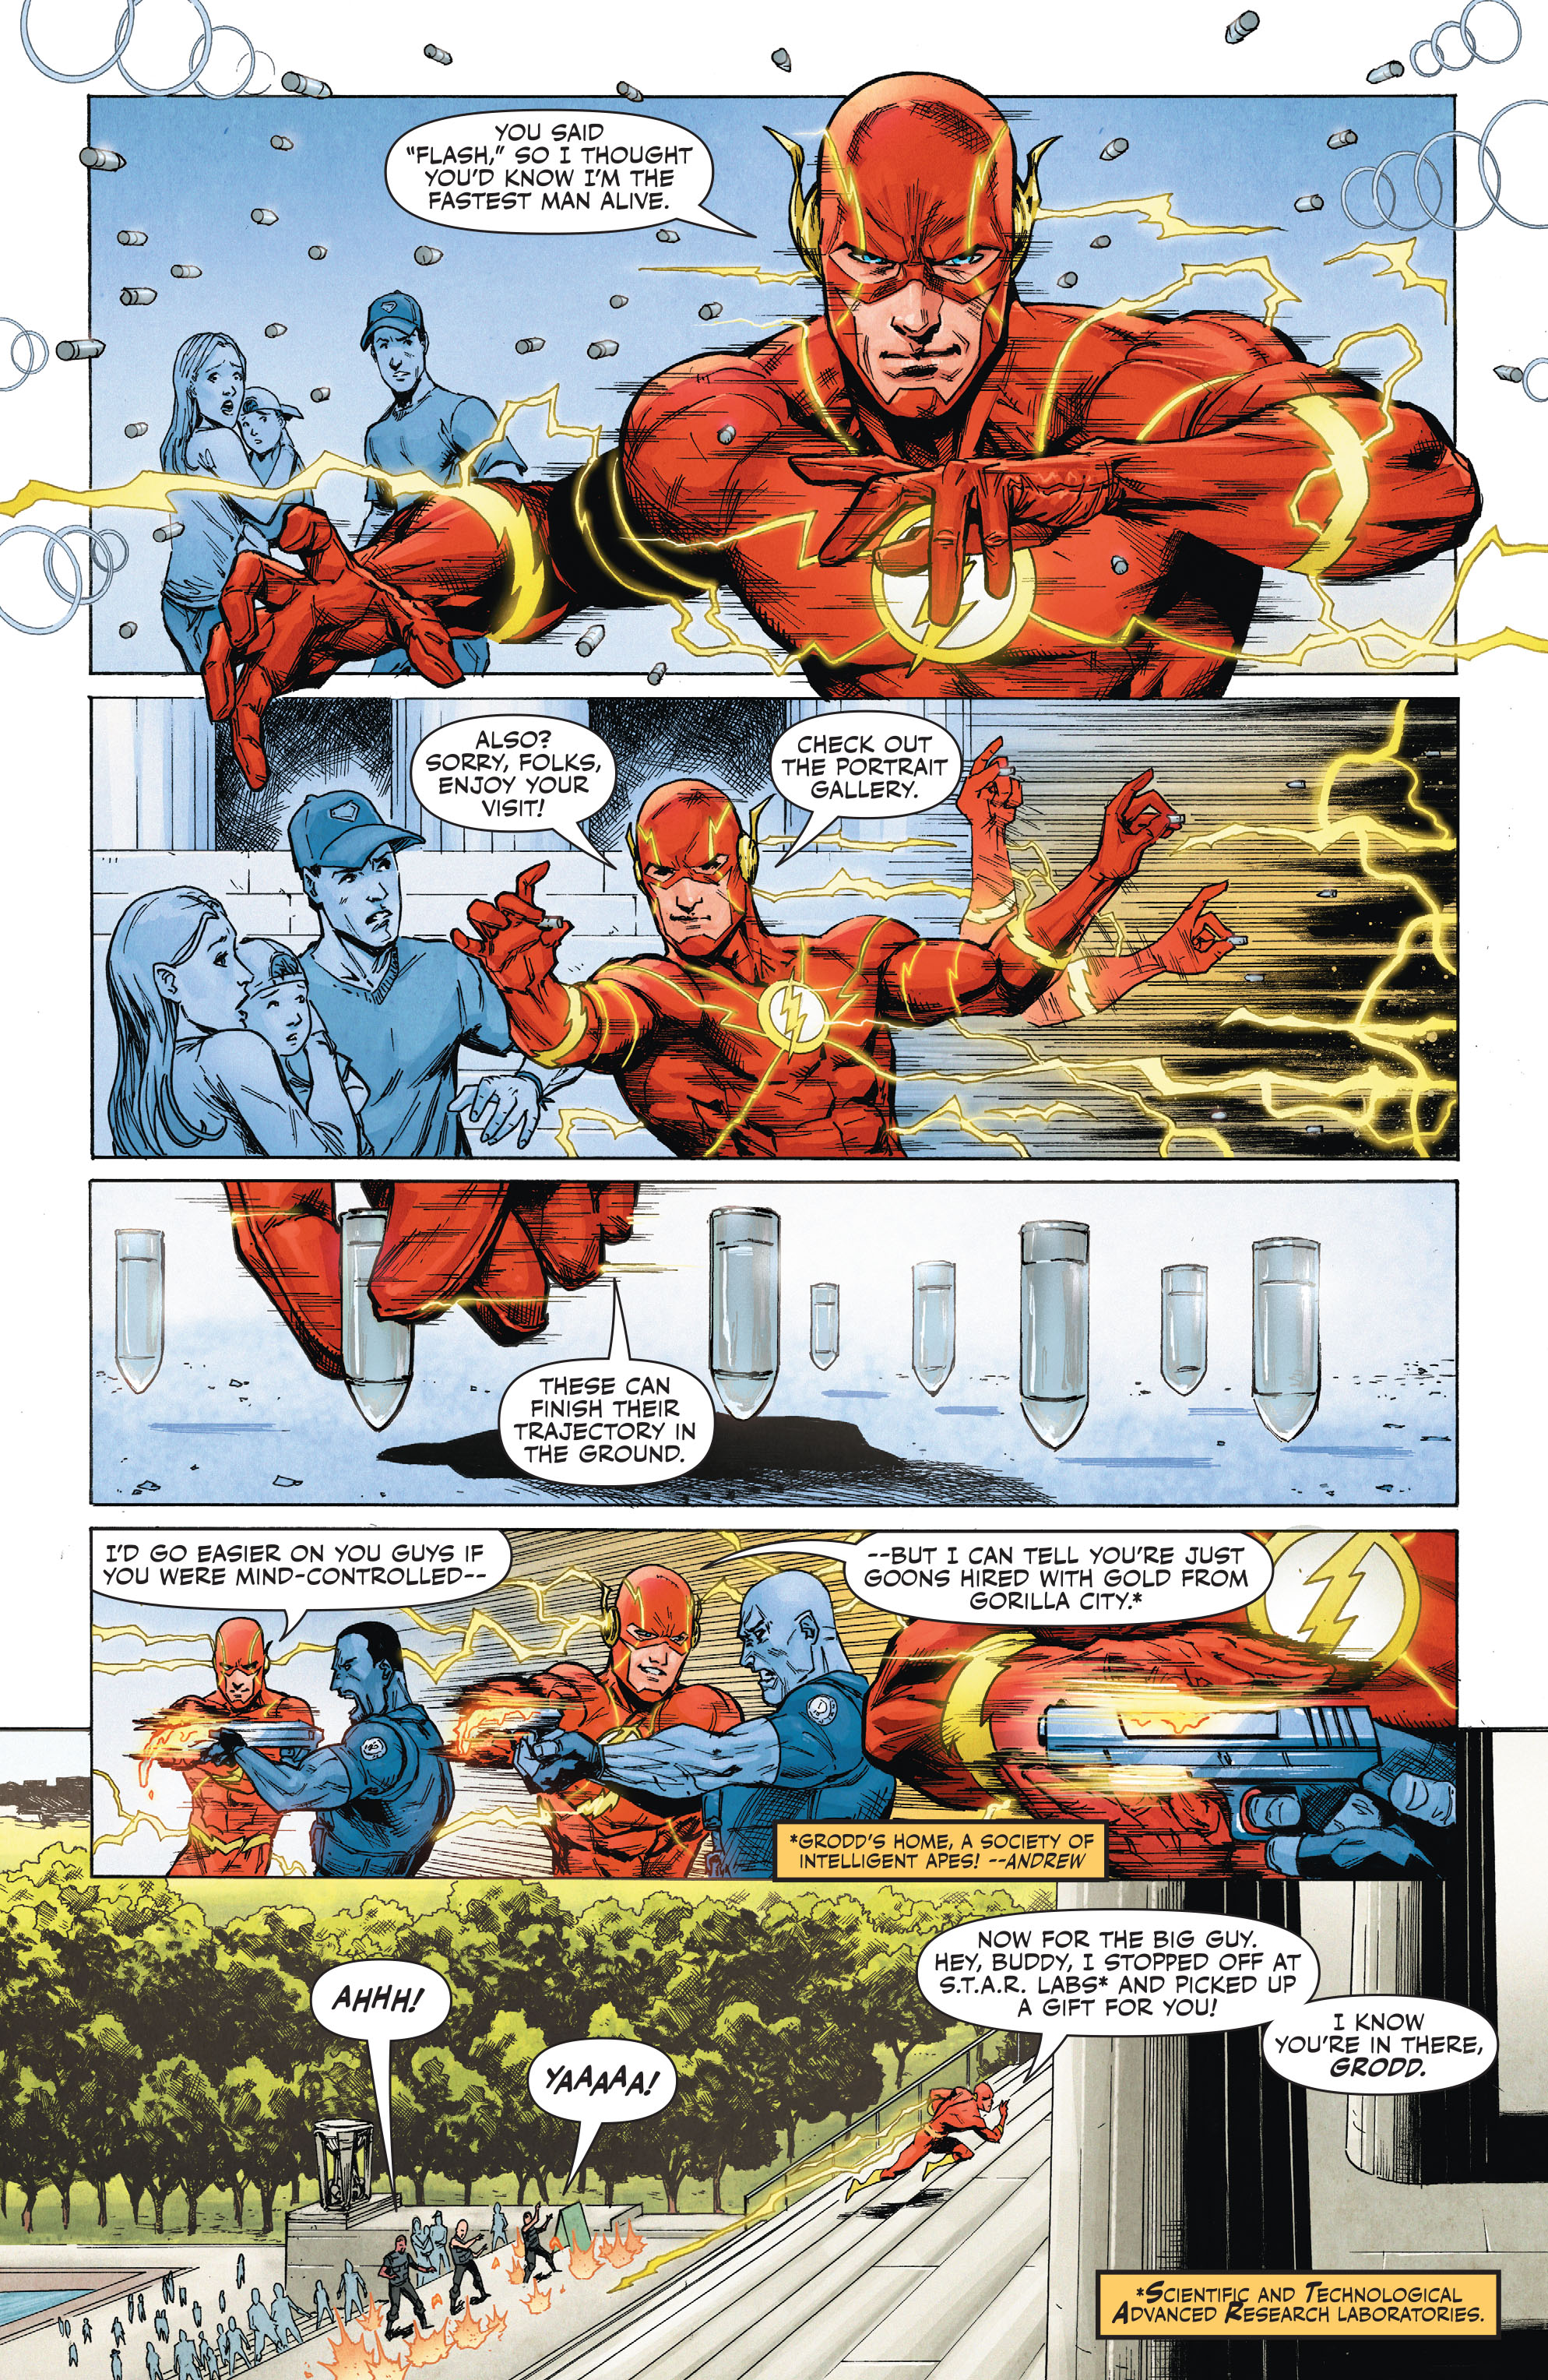 The Flash: Fastest Man Alive (2020-): Chapter 6 - Page 4